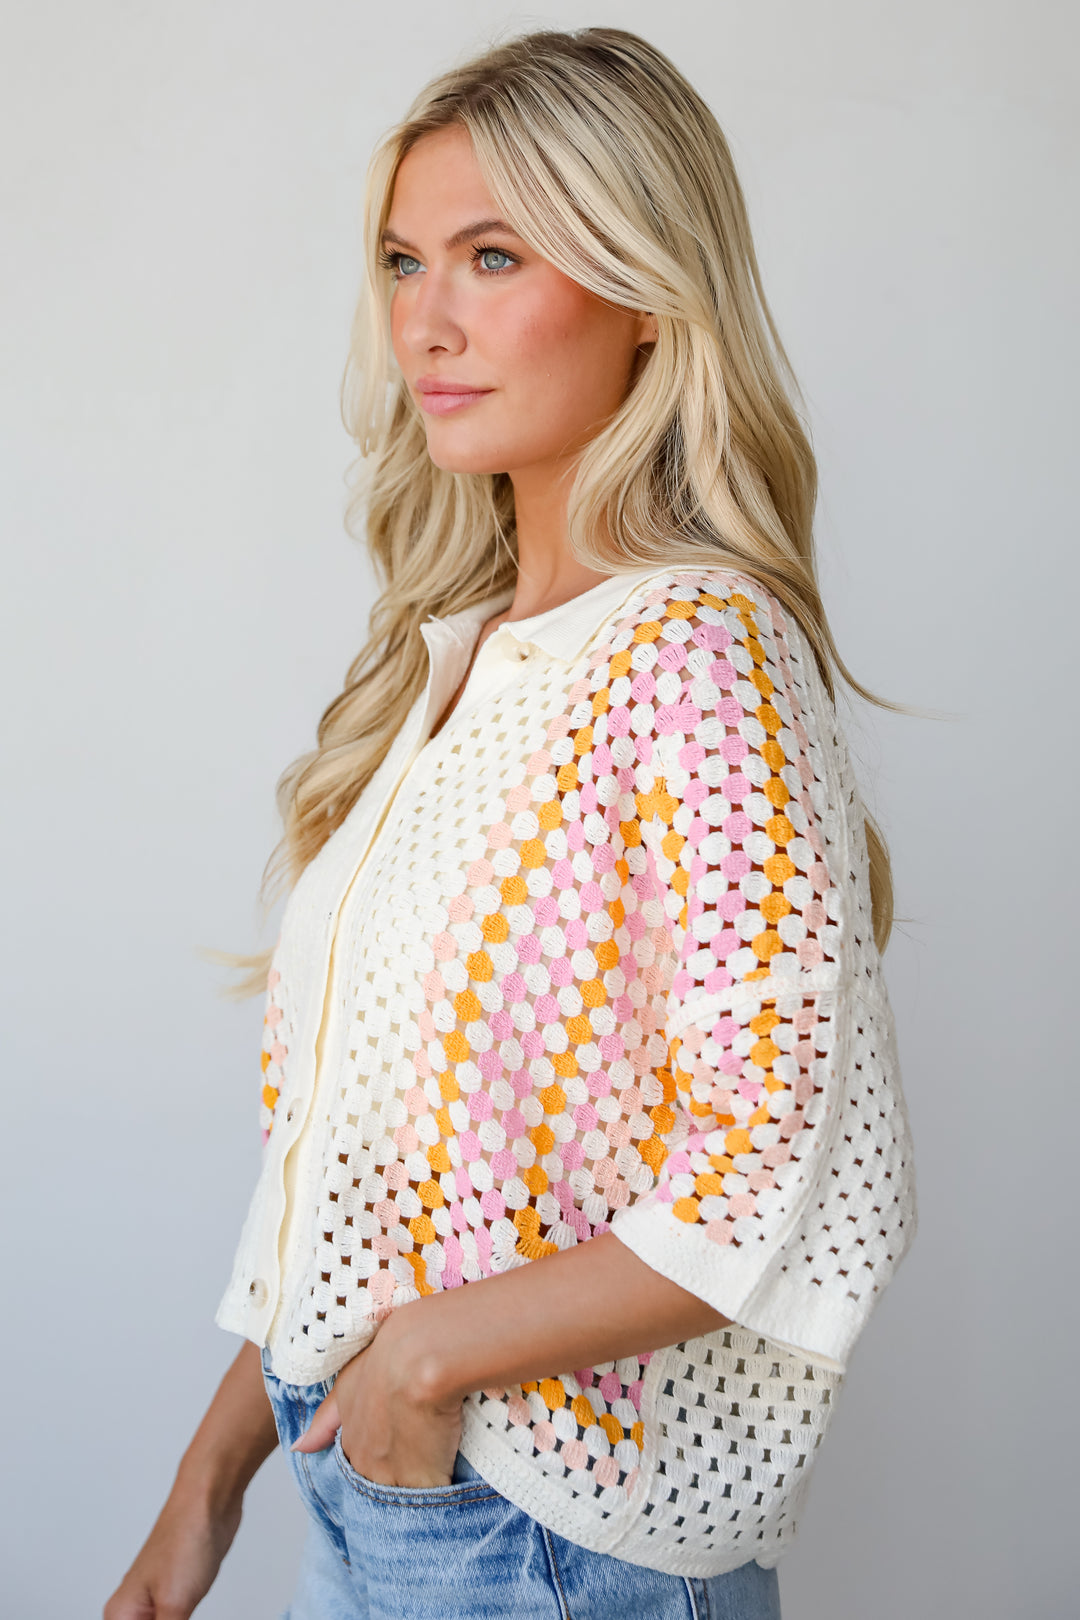 Adorable Enthusiasm Natural Crochet Knit Top. Cute Vacation Tops For Women 